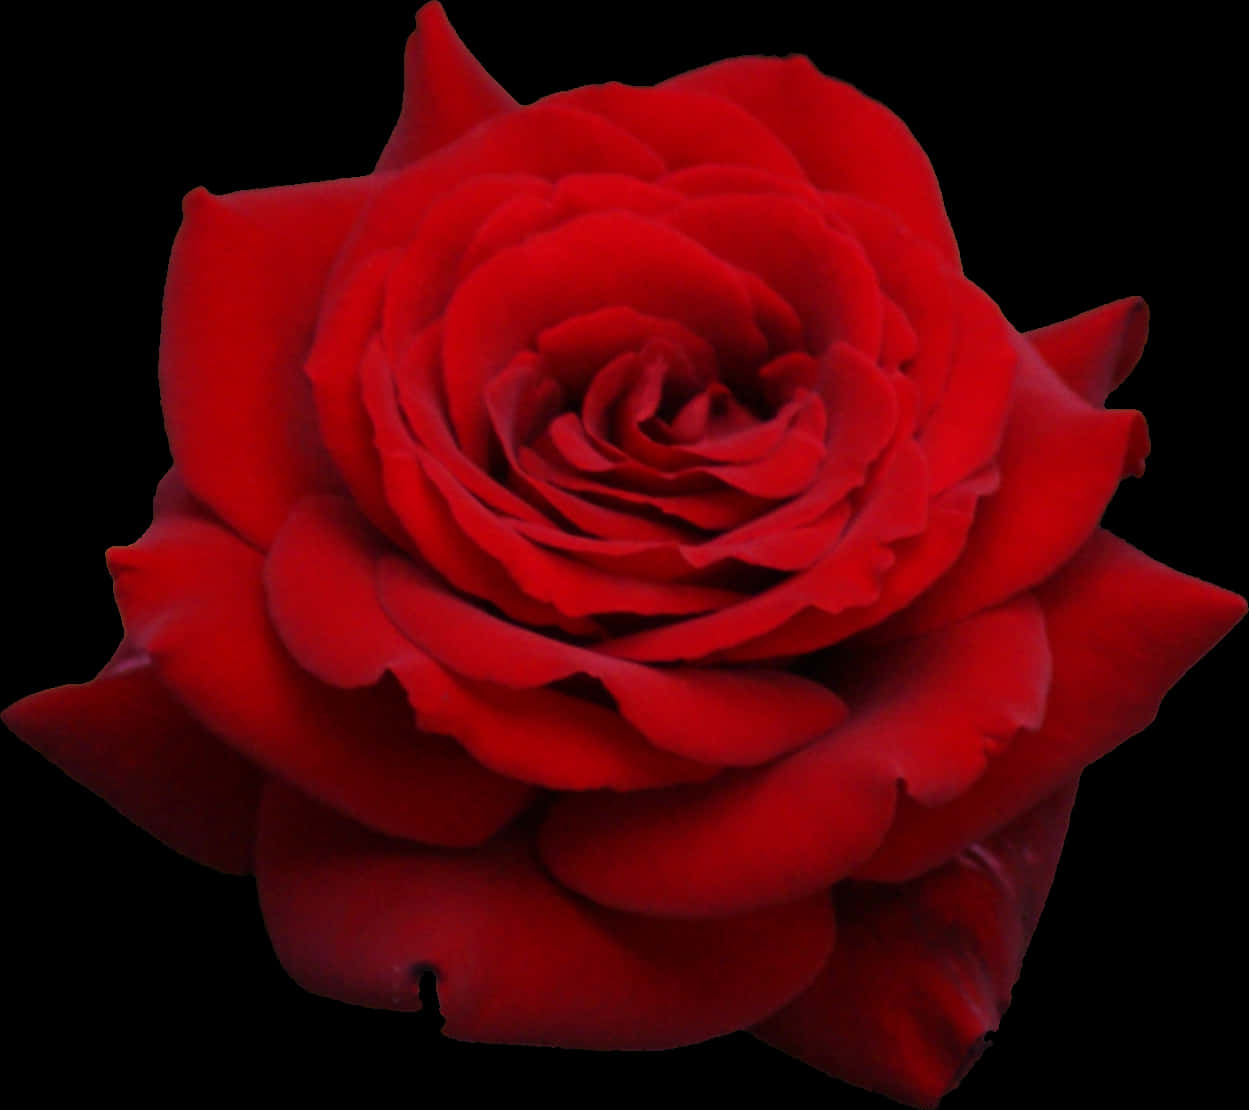 Red Rose Without Stem